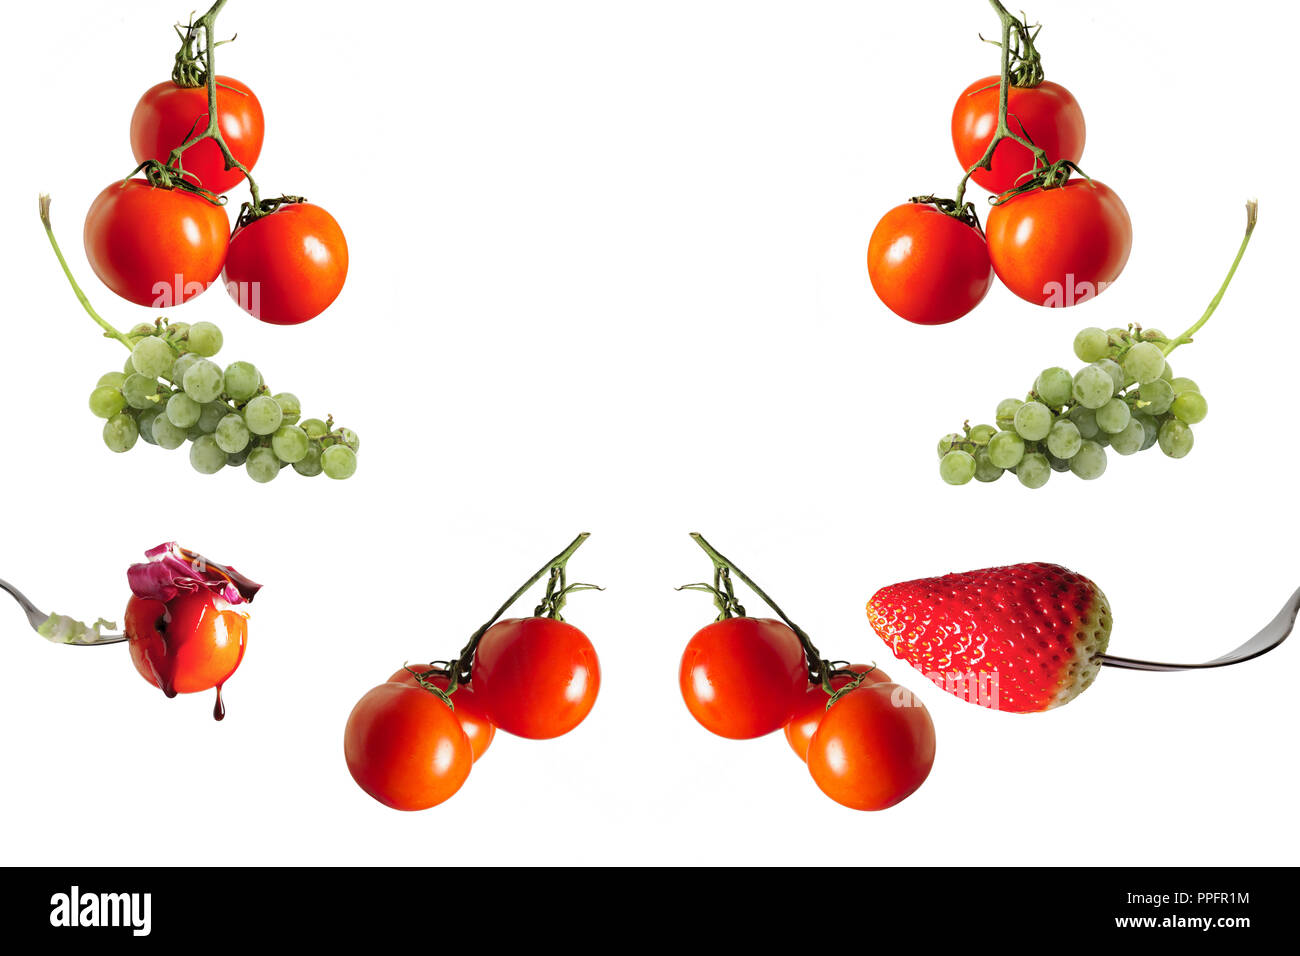 Fruit and vegetables pattern on white background Stock Photo